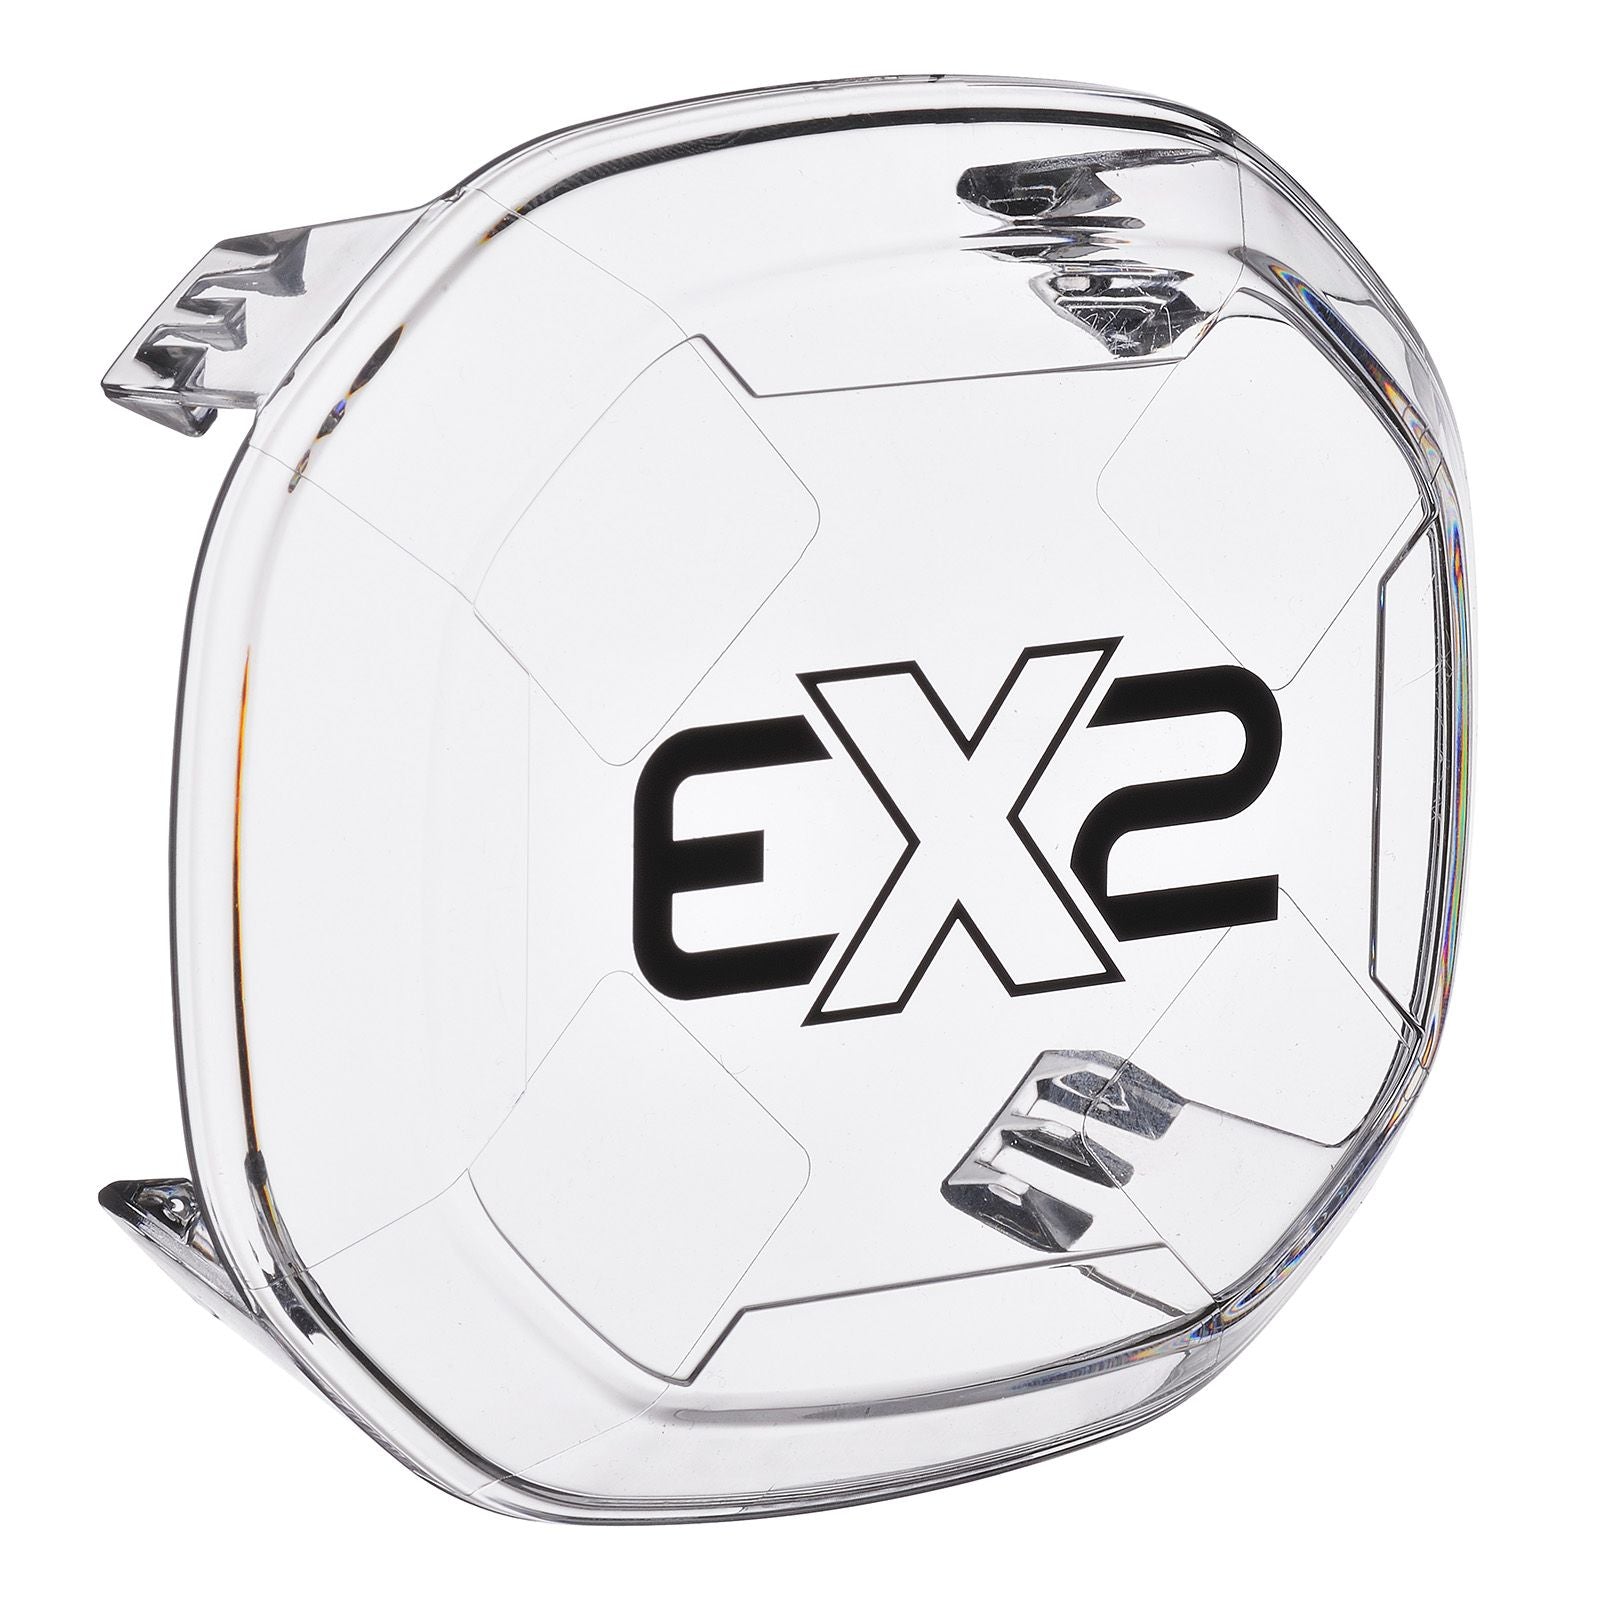 4" CLEAR LENS COVER EX2 EX2R DRIVING LIGHT ONLY